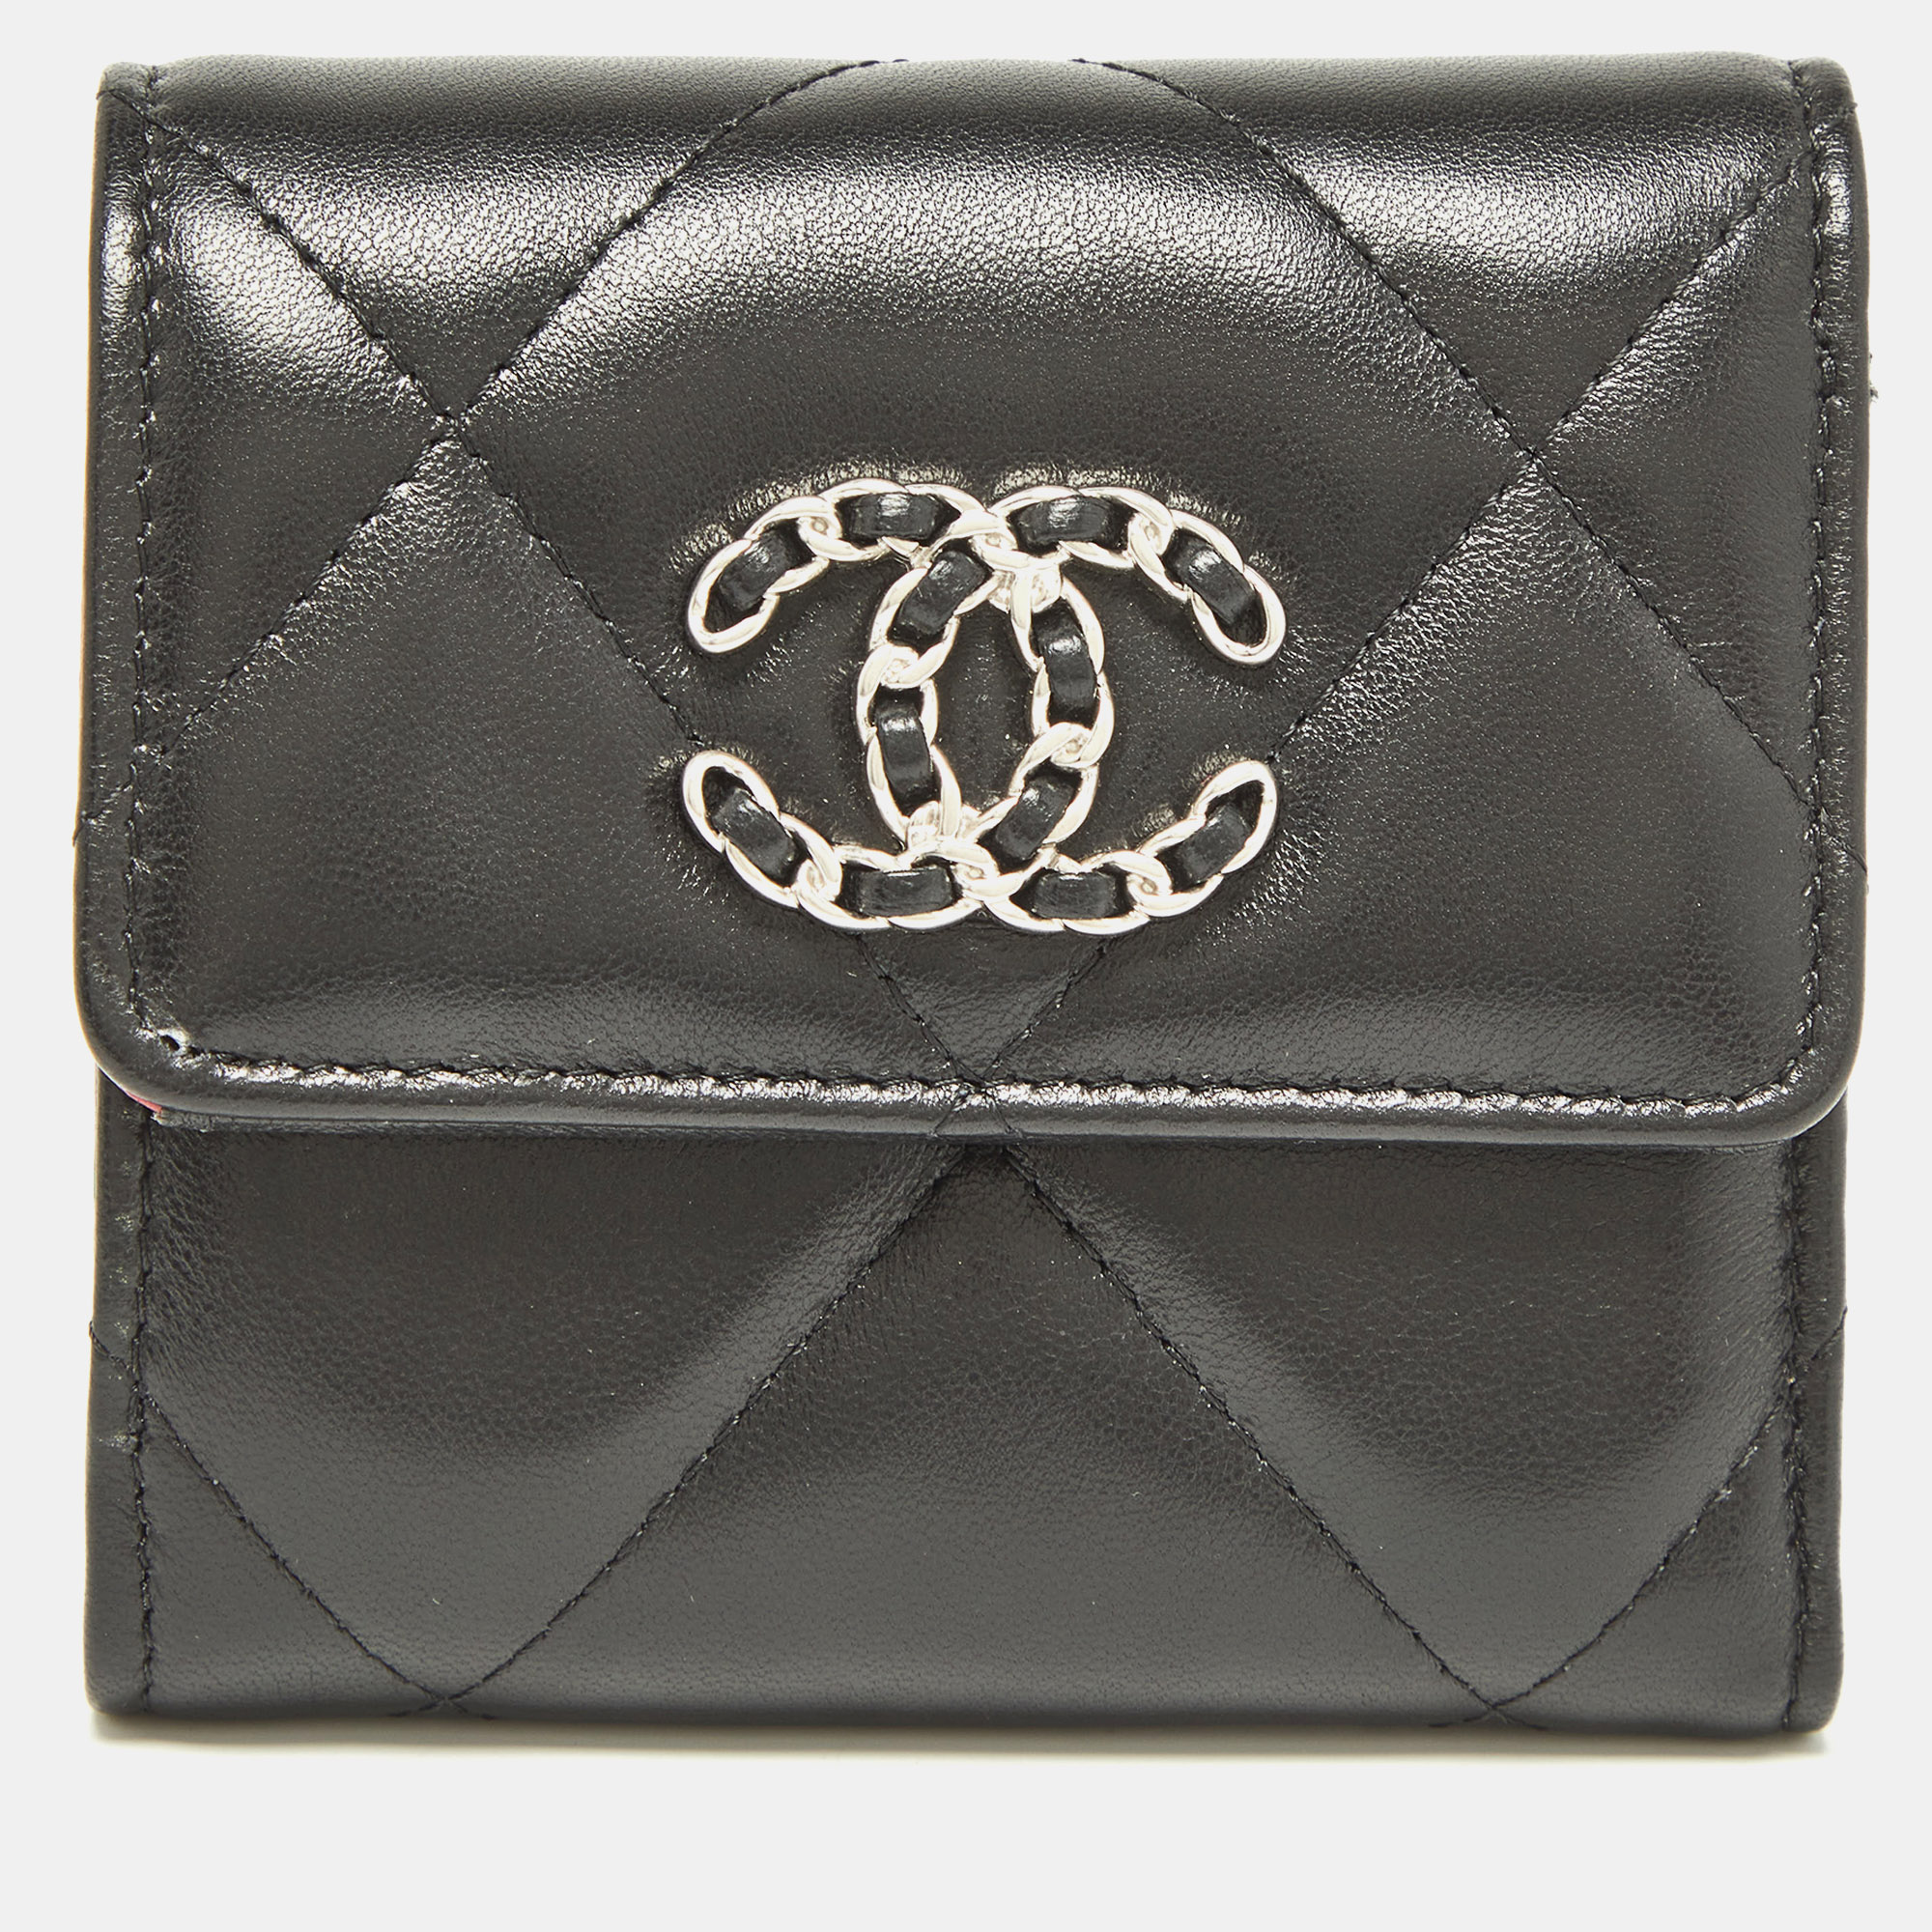 Chanel black quilted leather 19 trifold wallet